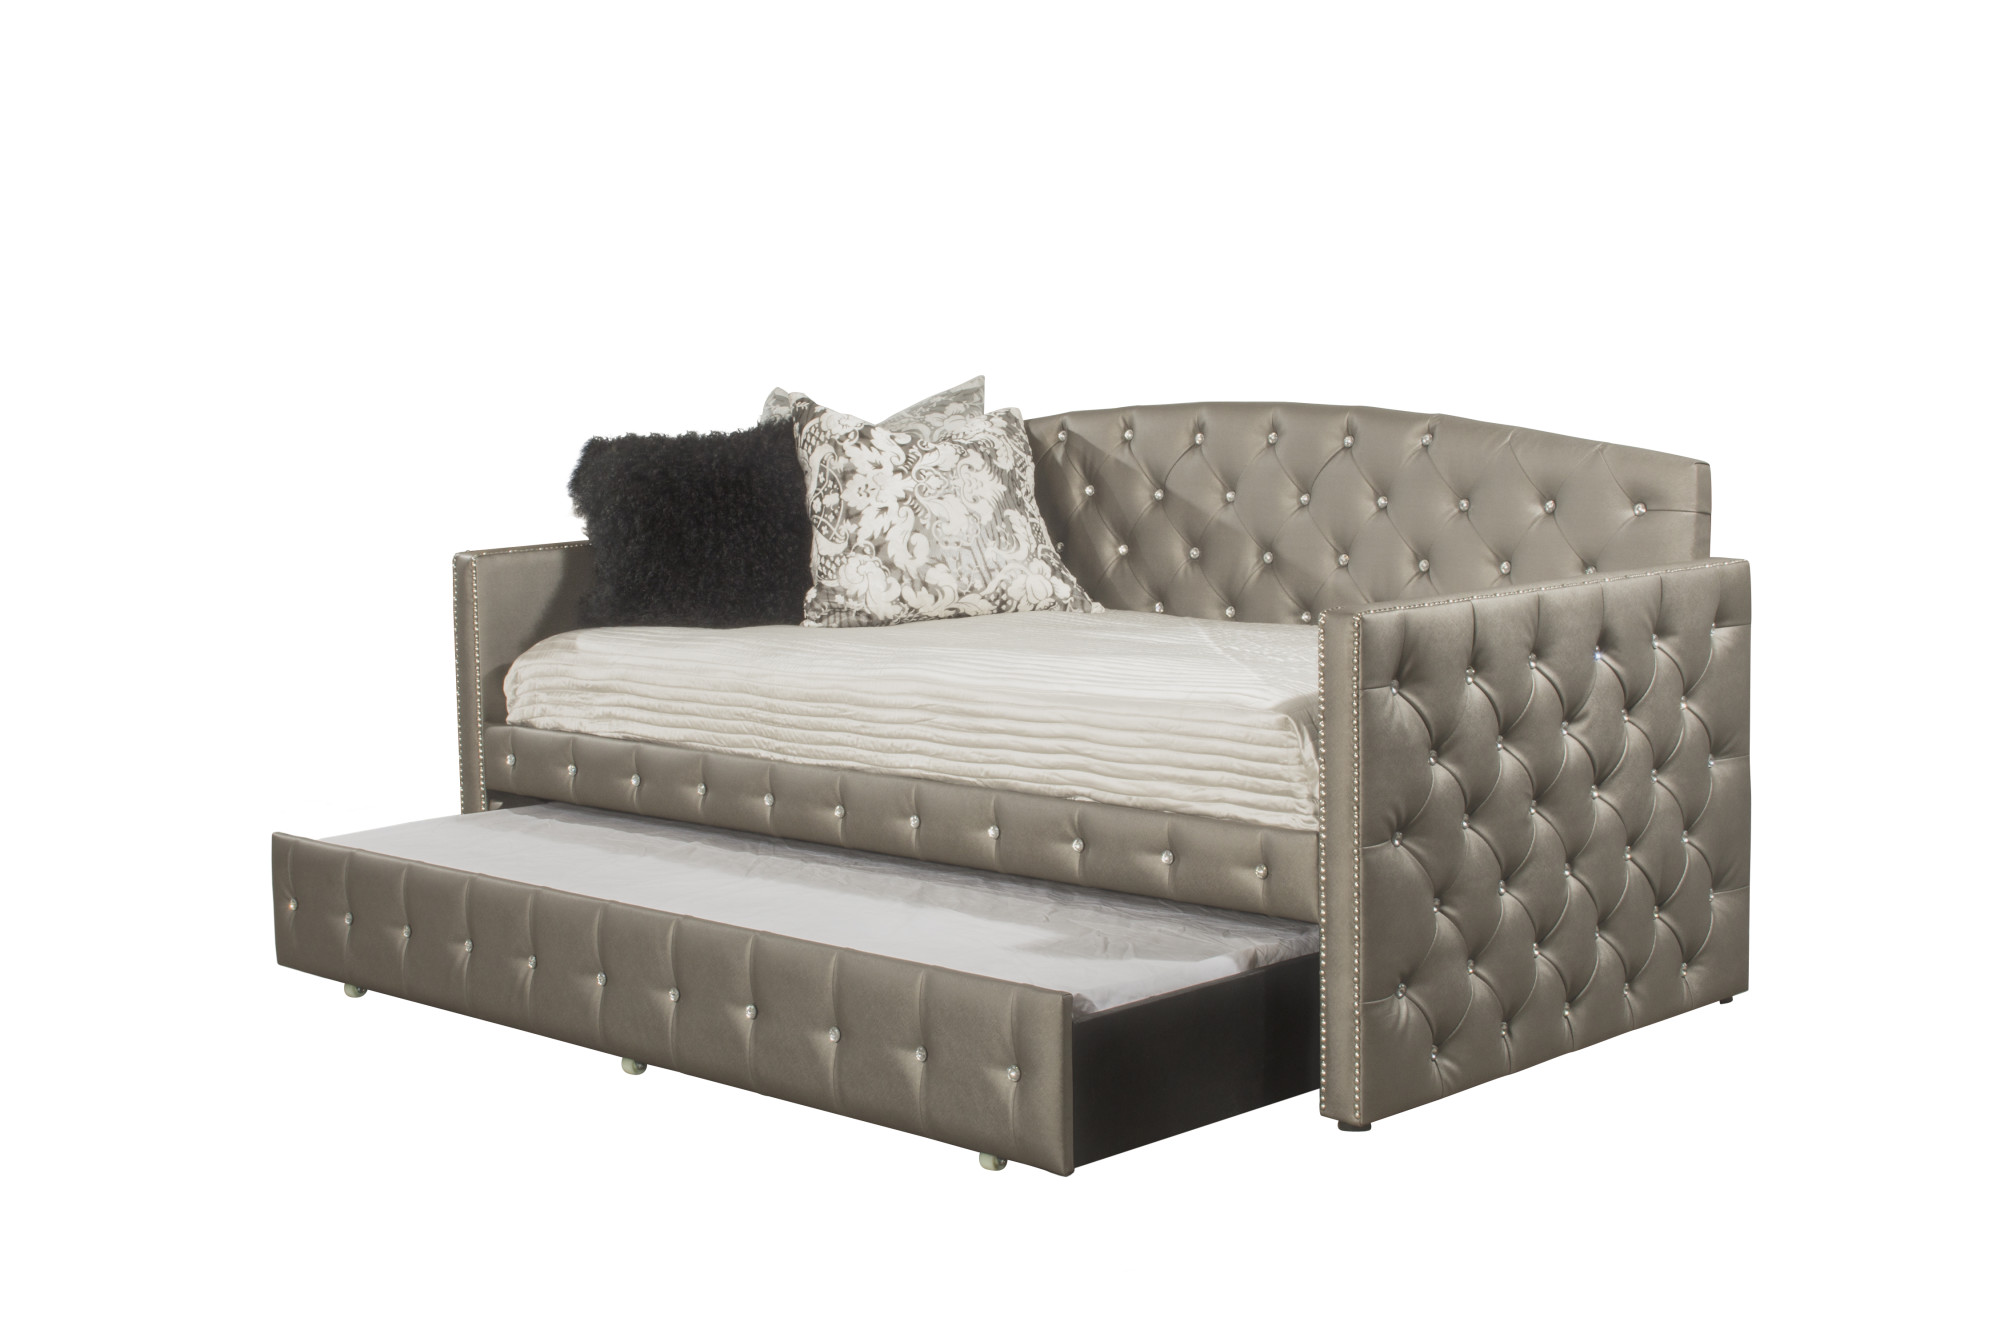 Hillsdale Furniture Memphis Upholstered Twin Daybed with Trundle, Pewter - image 5 of 5